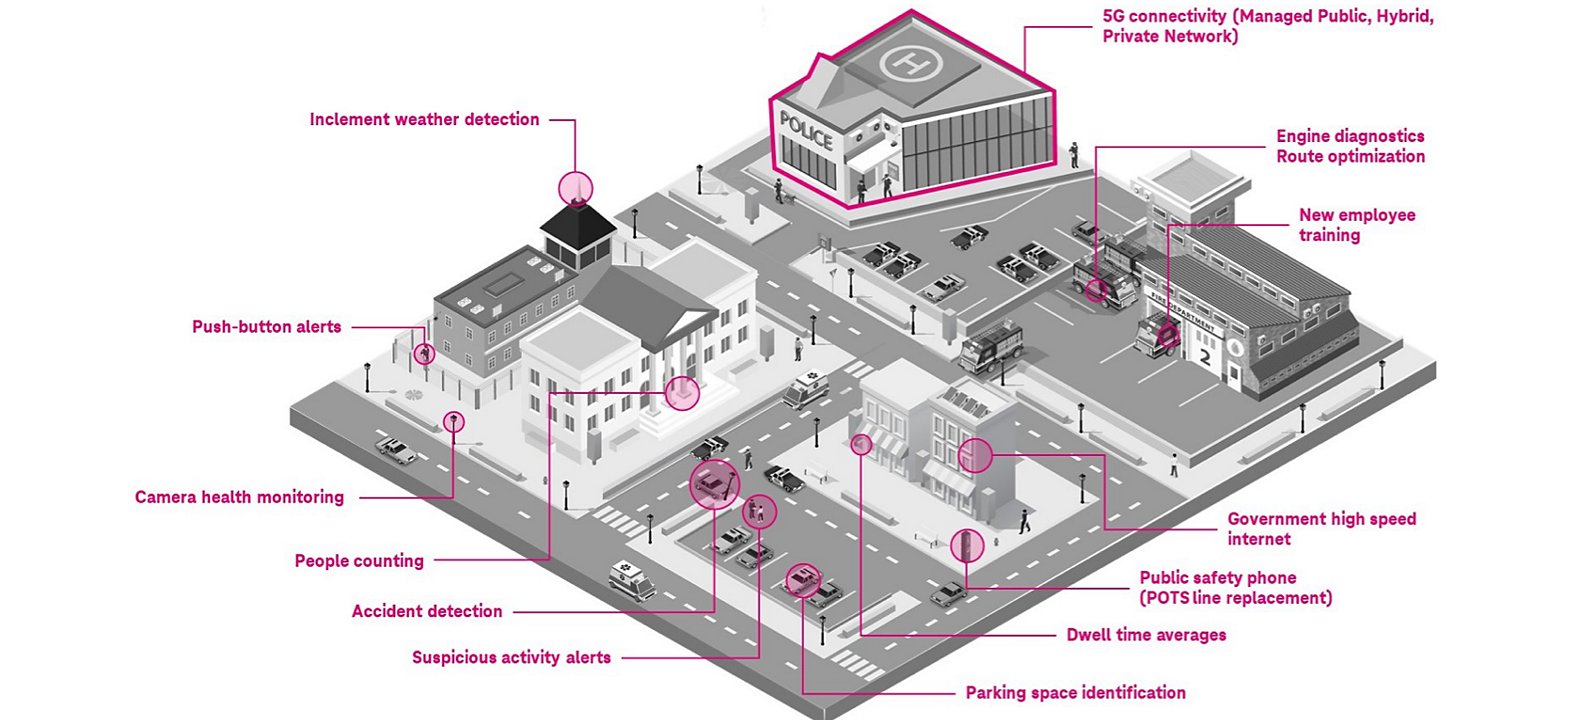 Illustrated overhead view of city streets and buildings with callouts